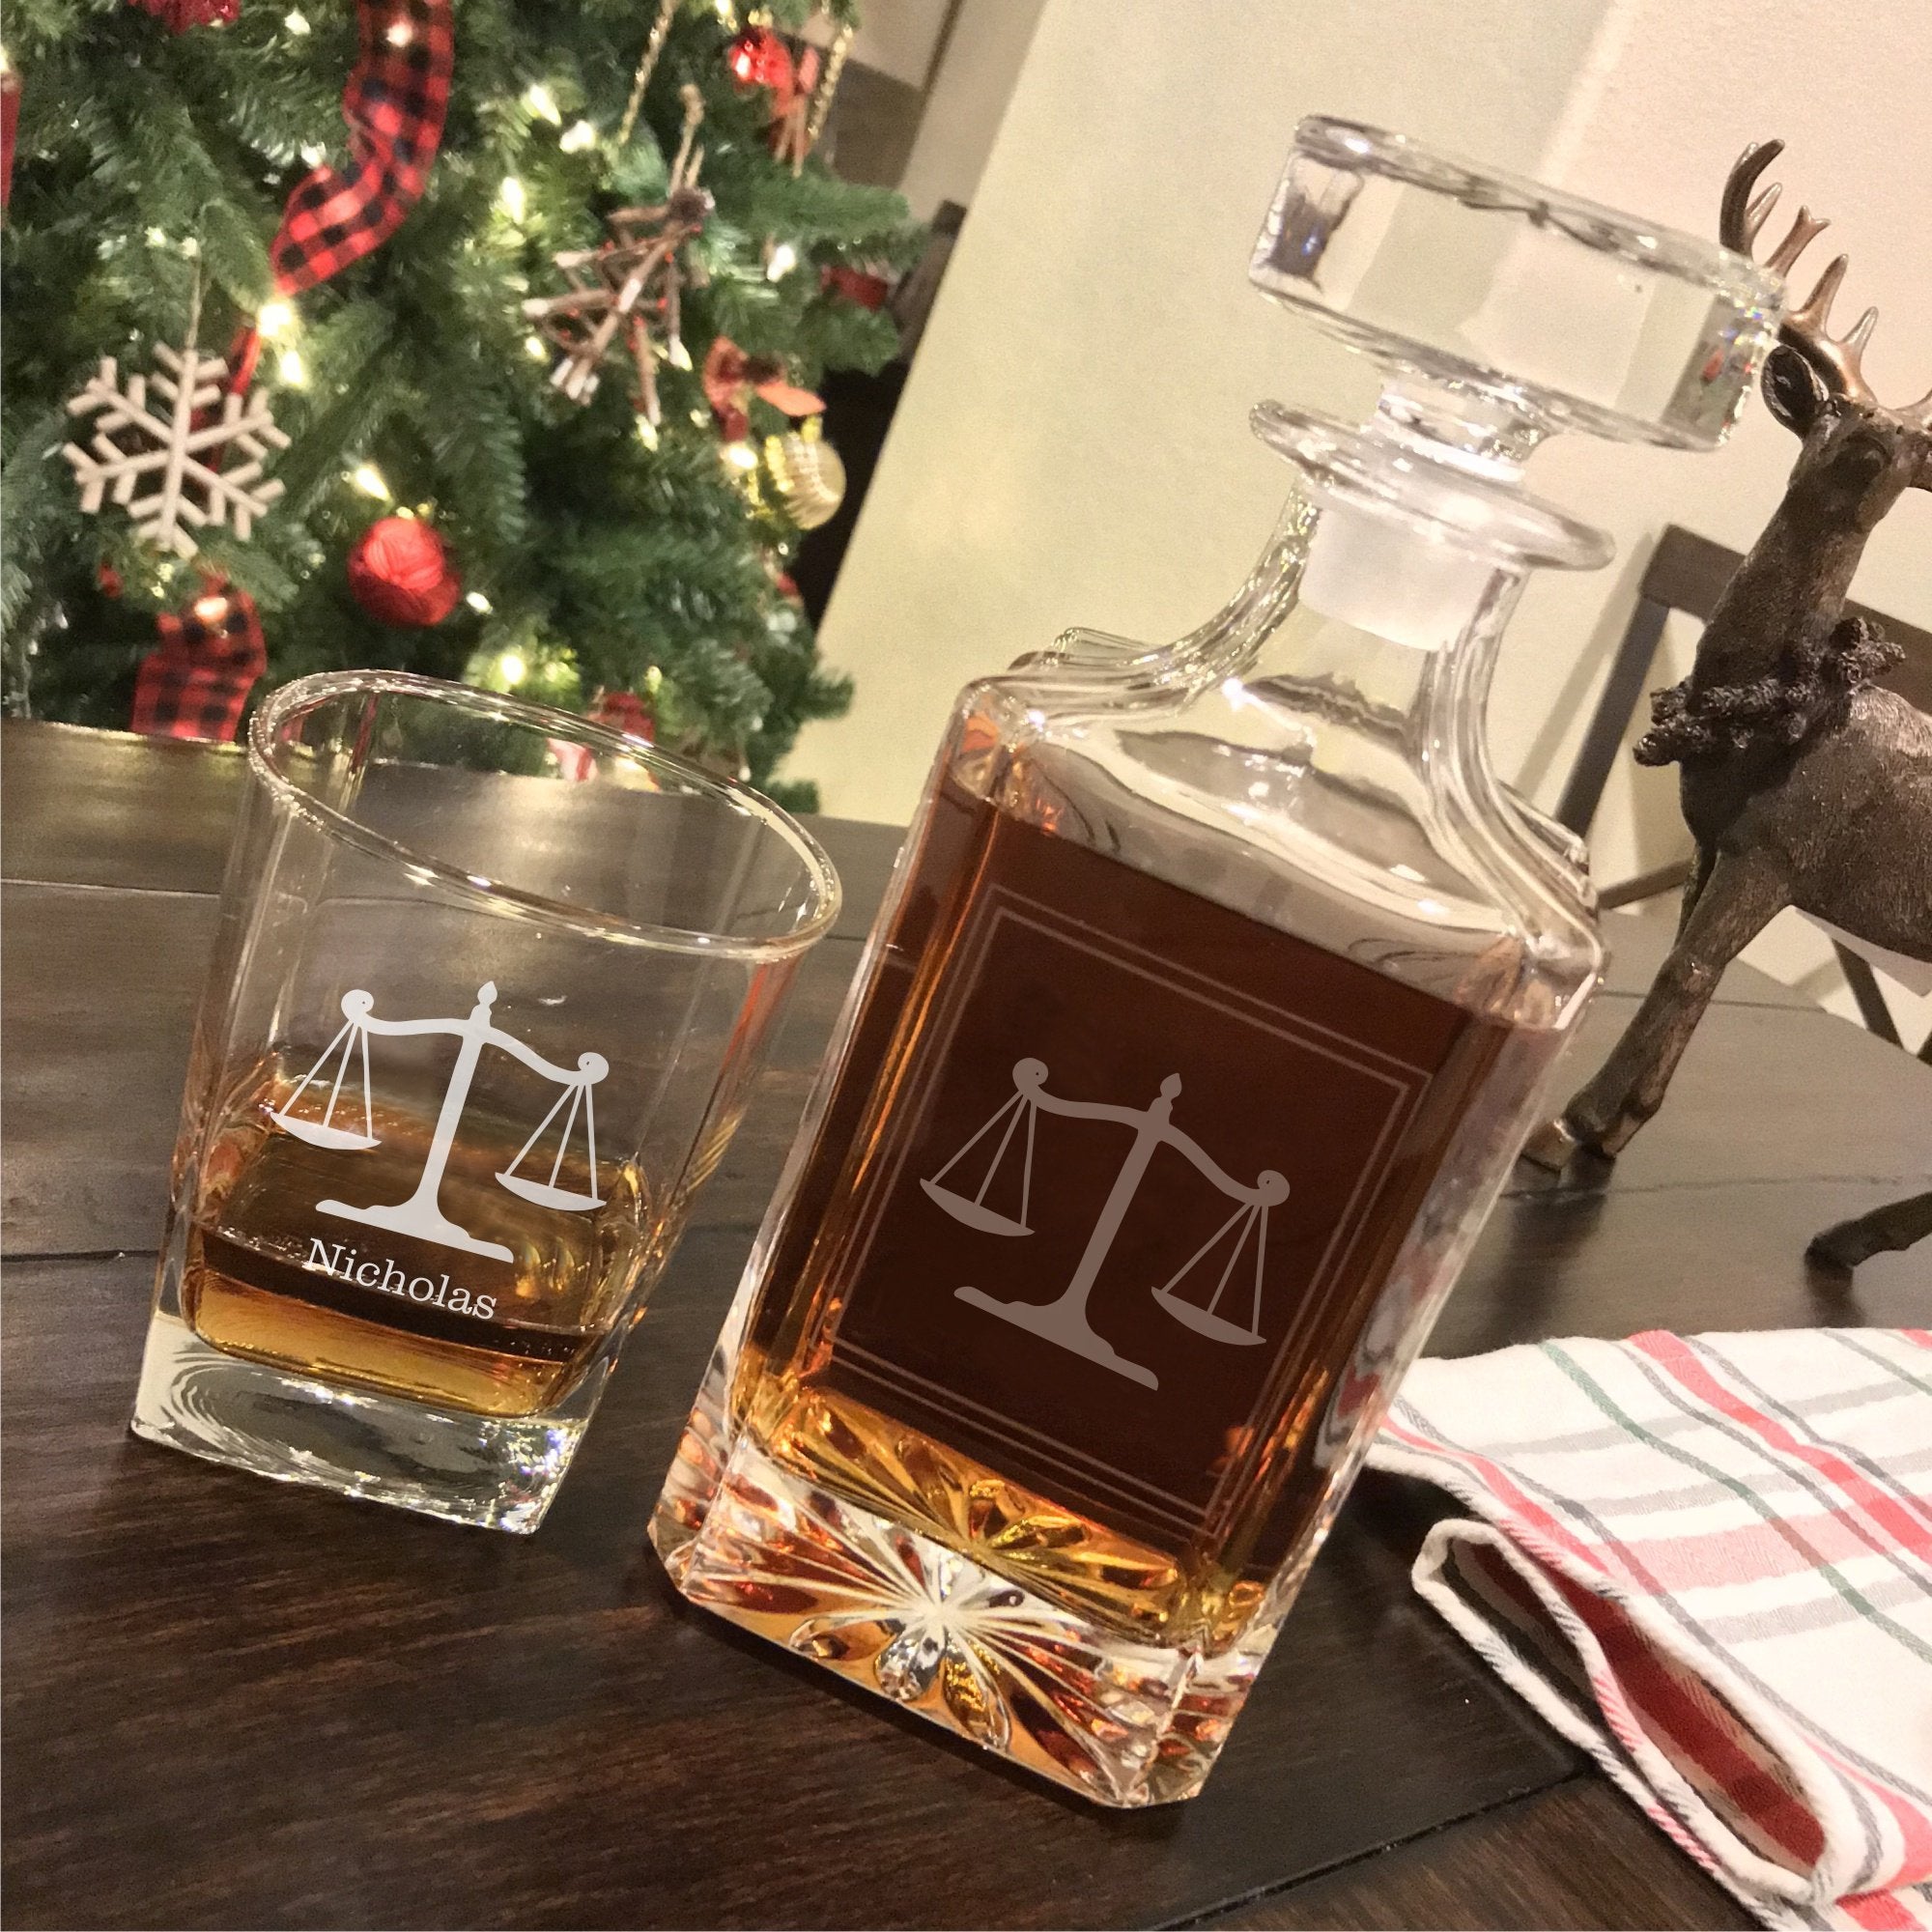 Lawyer Attorney Engraved Whiskey Decanter Set - Lone Star Etch